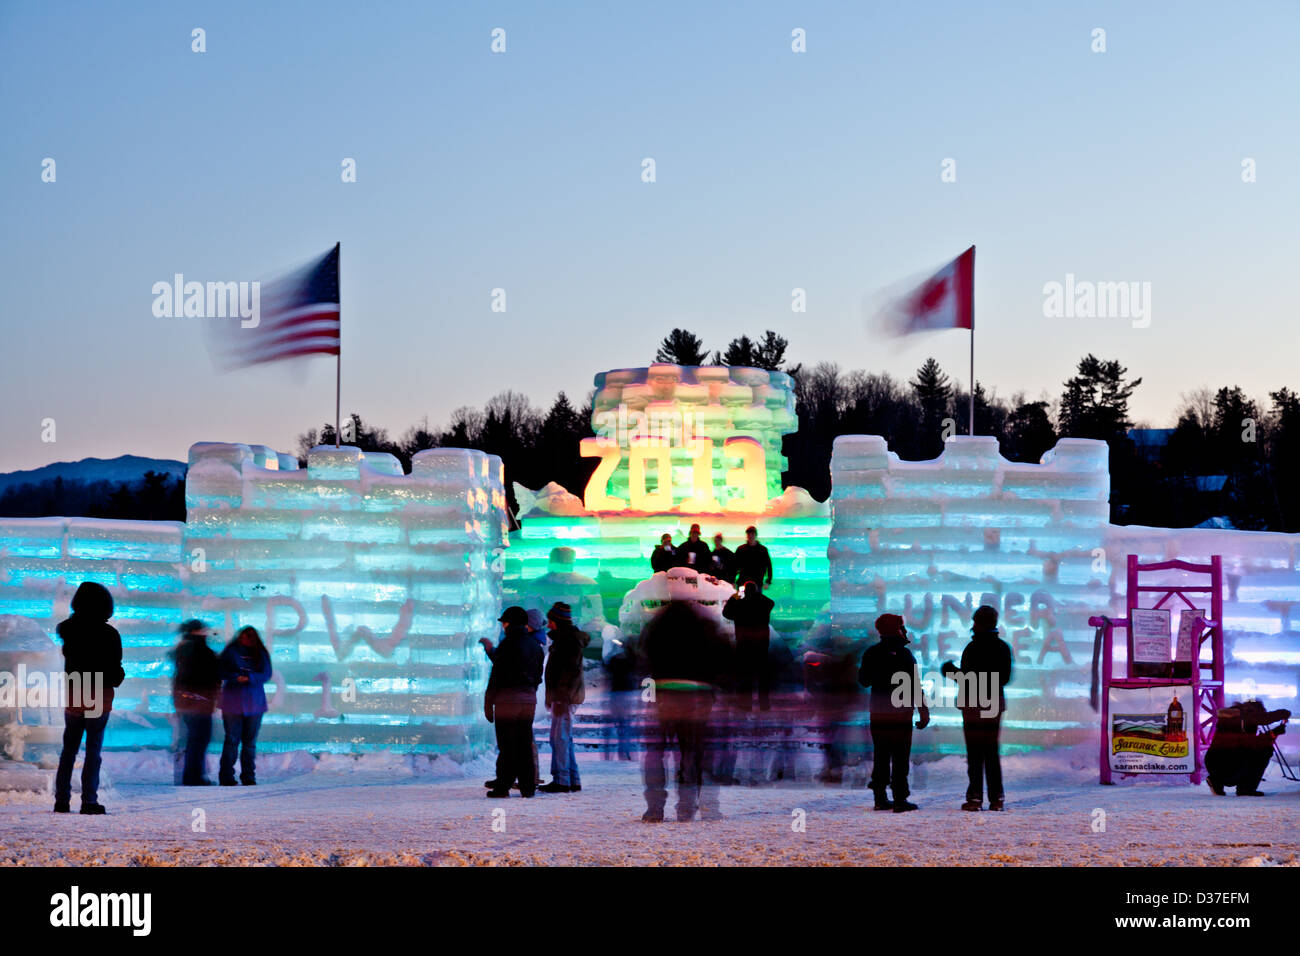 Children And Families Explore The Ice Palace At Saranac Lake Winter Stock Photo Alamy